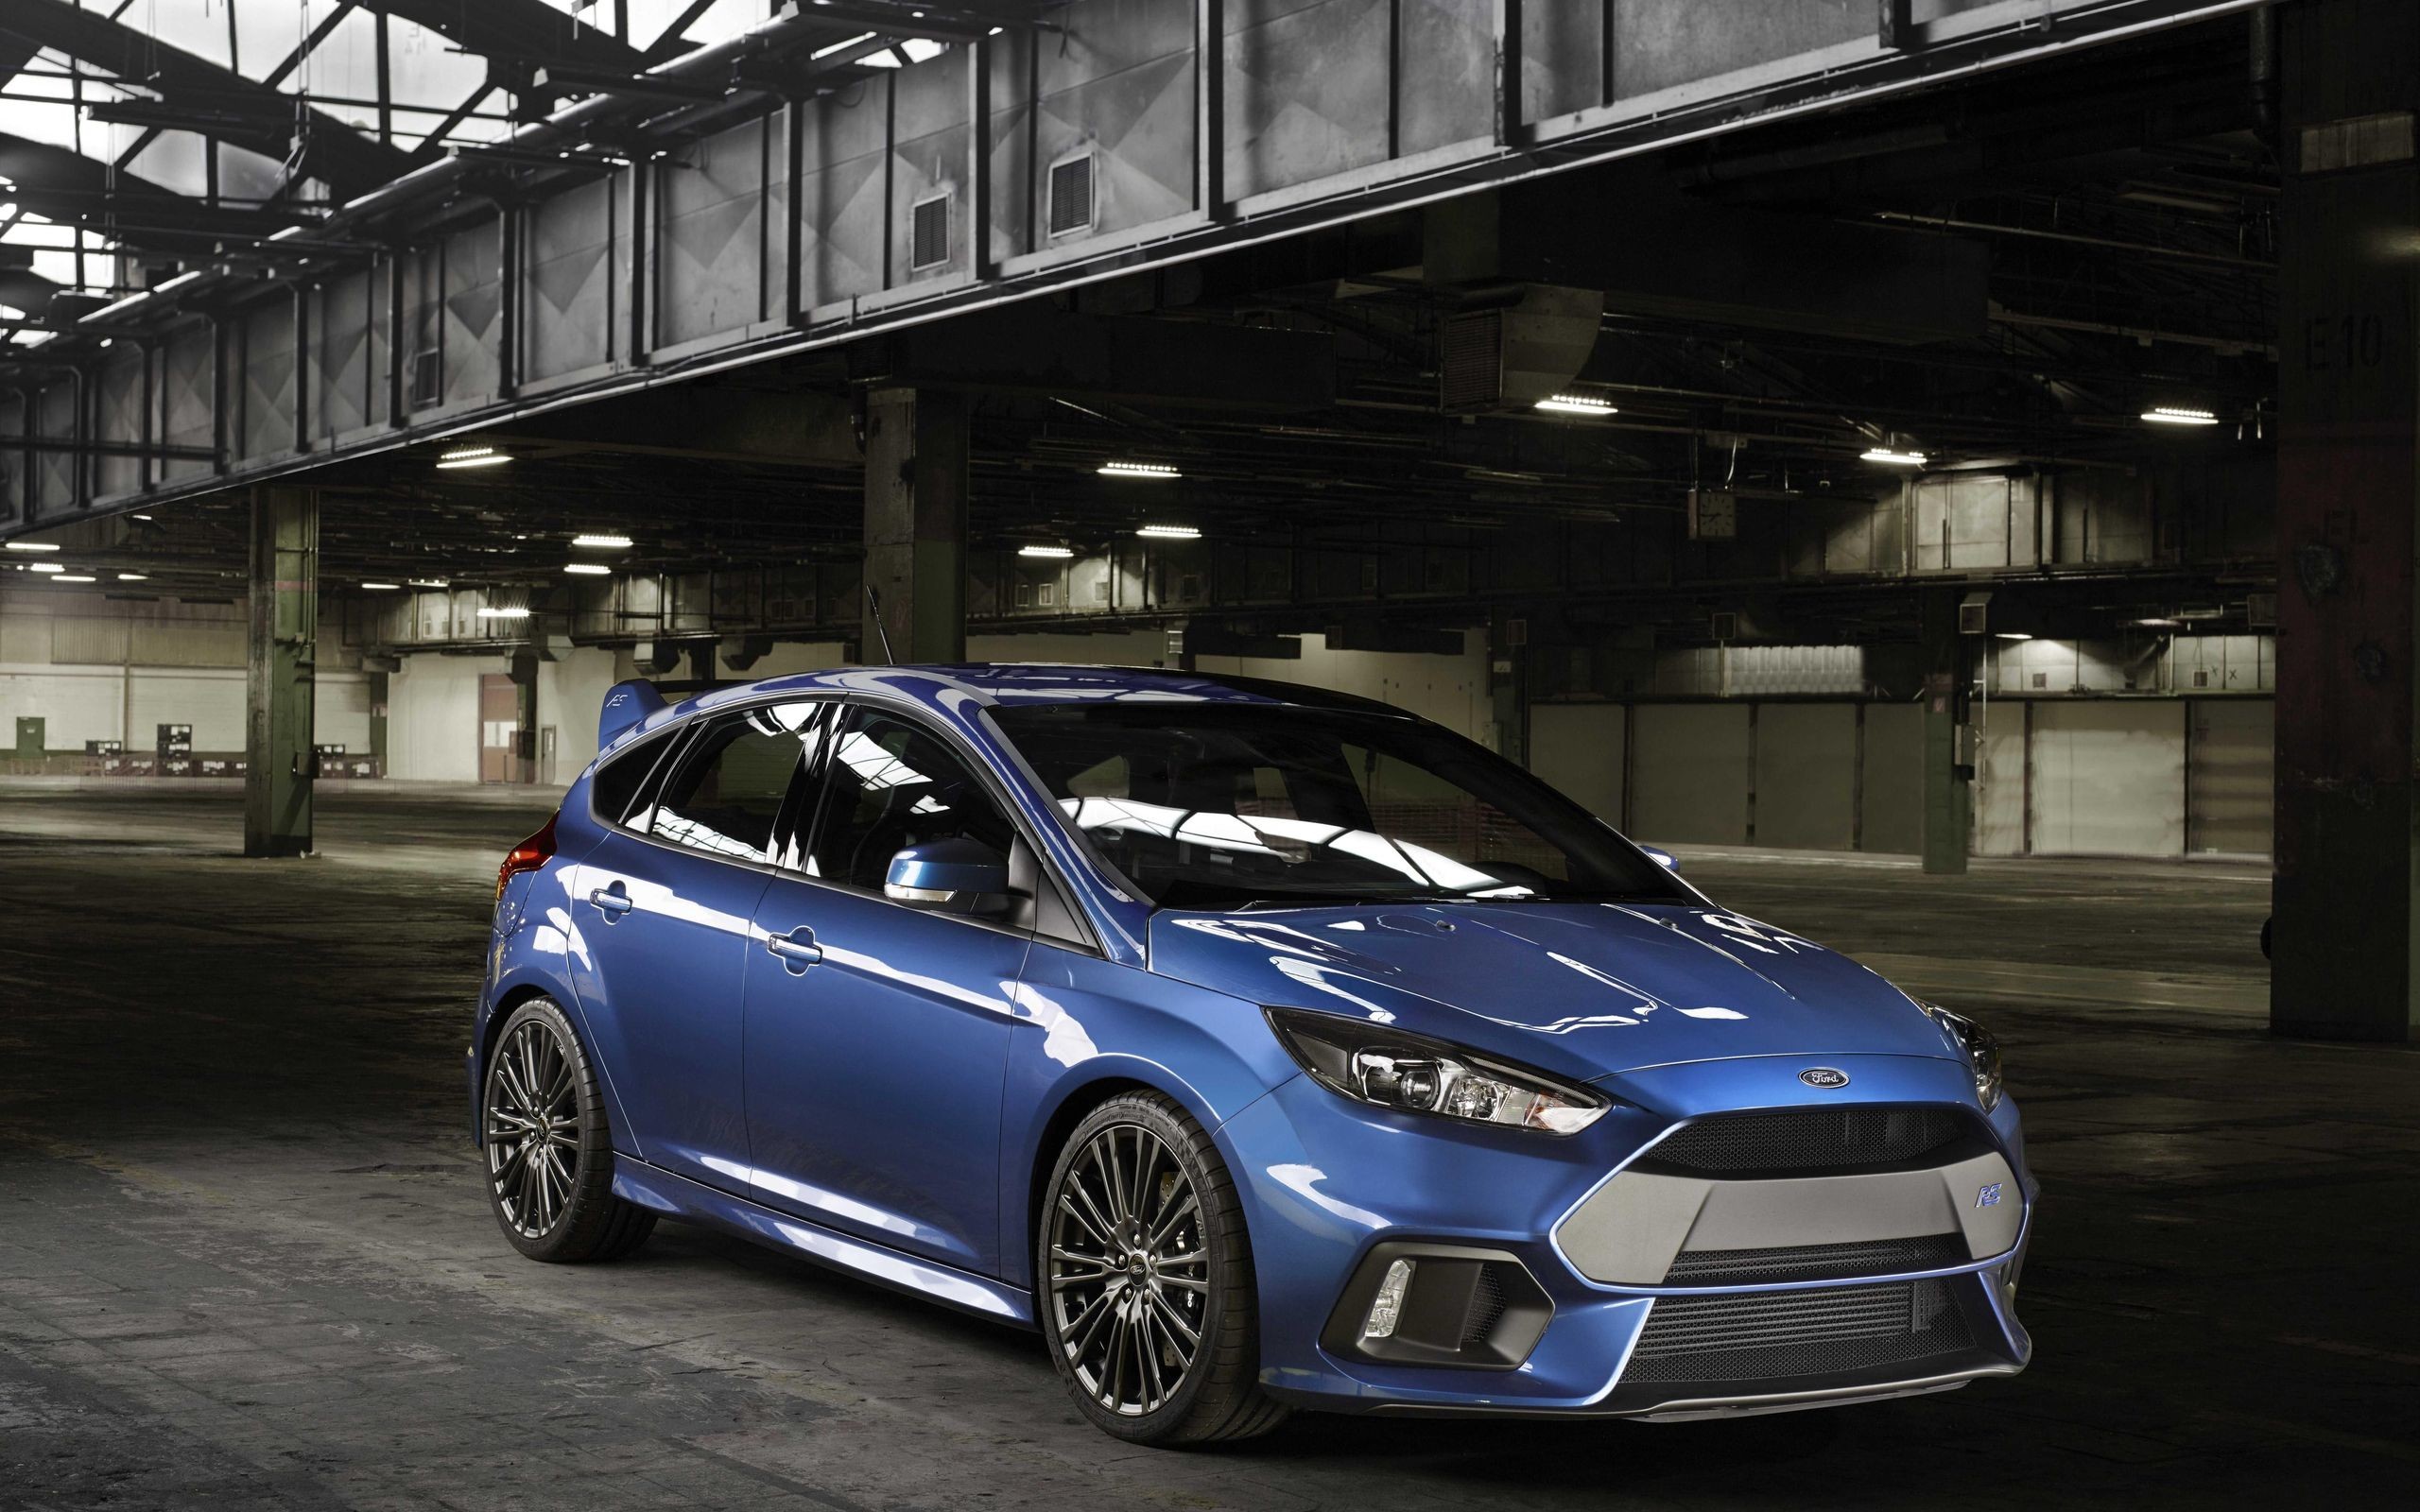 2560x1600 Give Your Desktop And Mobile A Hot Hatch Makeover With These 2016 Ford  Focus RS Wallpapers